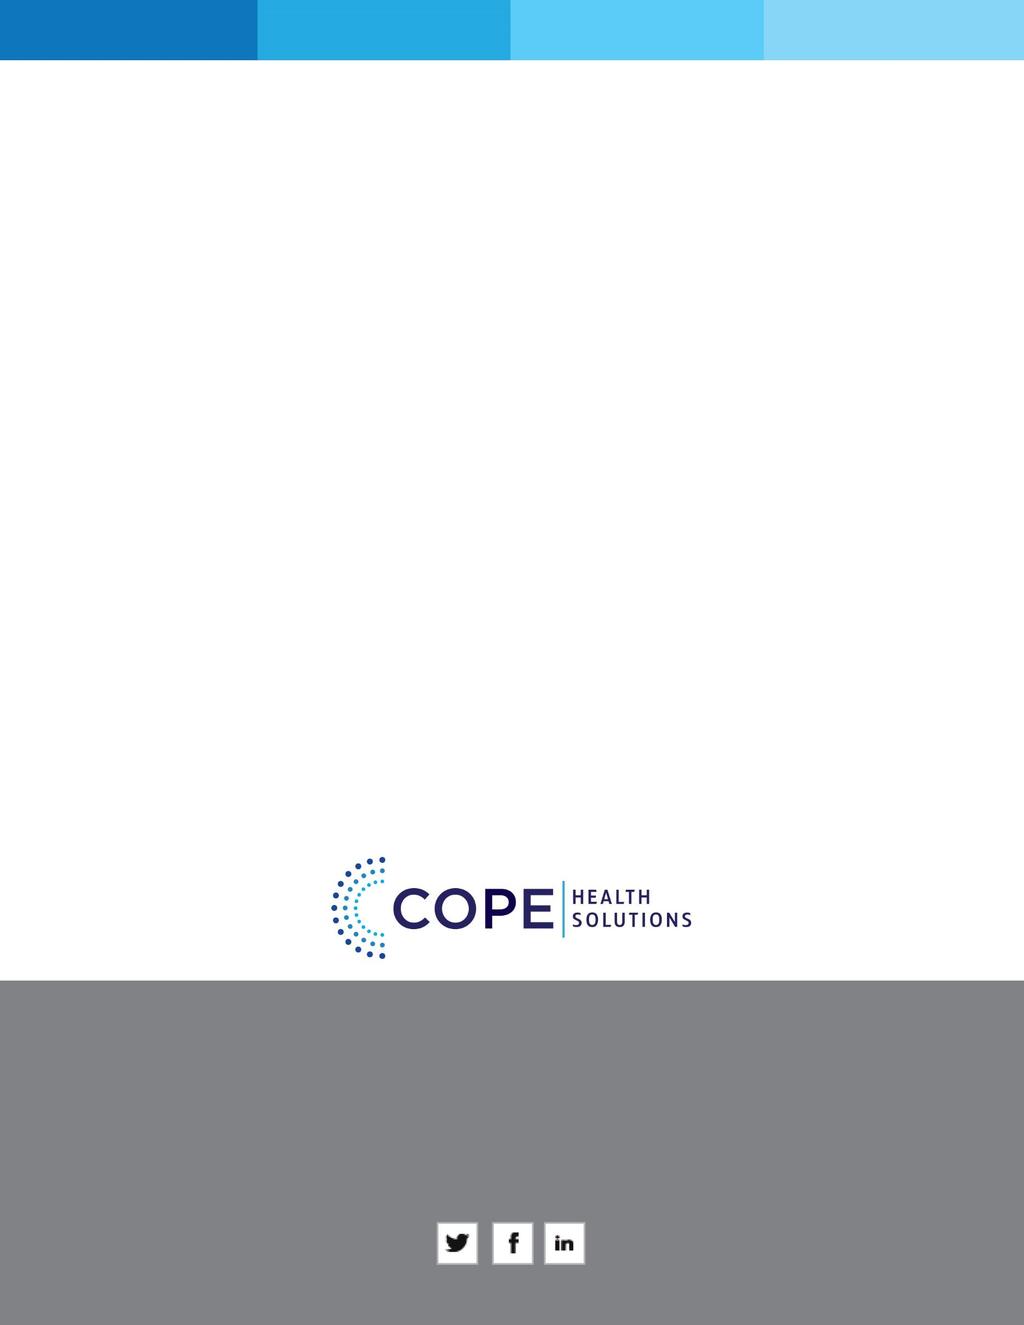 For more information about the COPE Health Scholars programs, please contact hcti@copehealthsolutions.org Learn more about us and how we can help you in the changing market at: www.